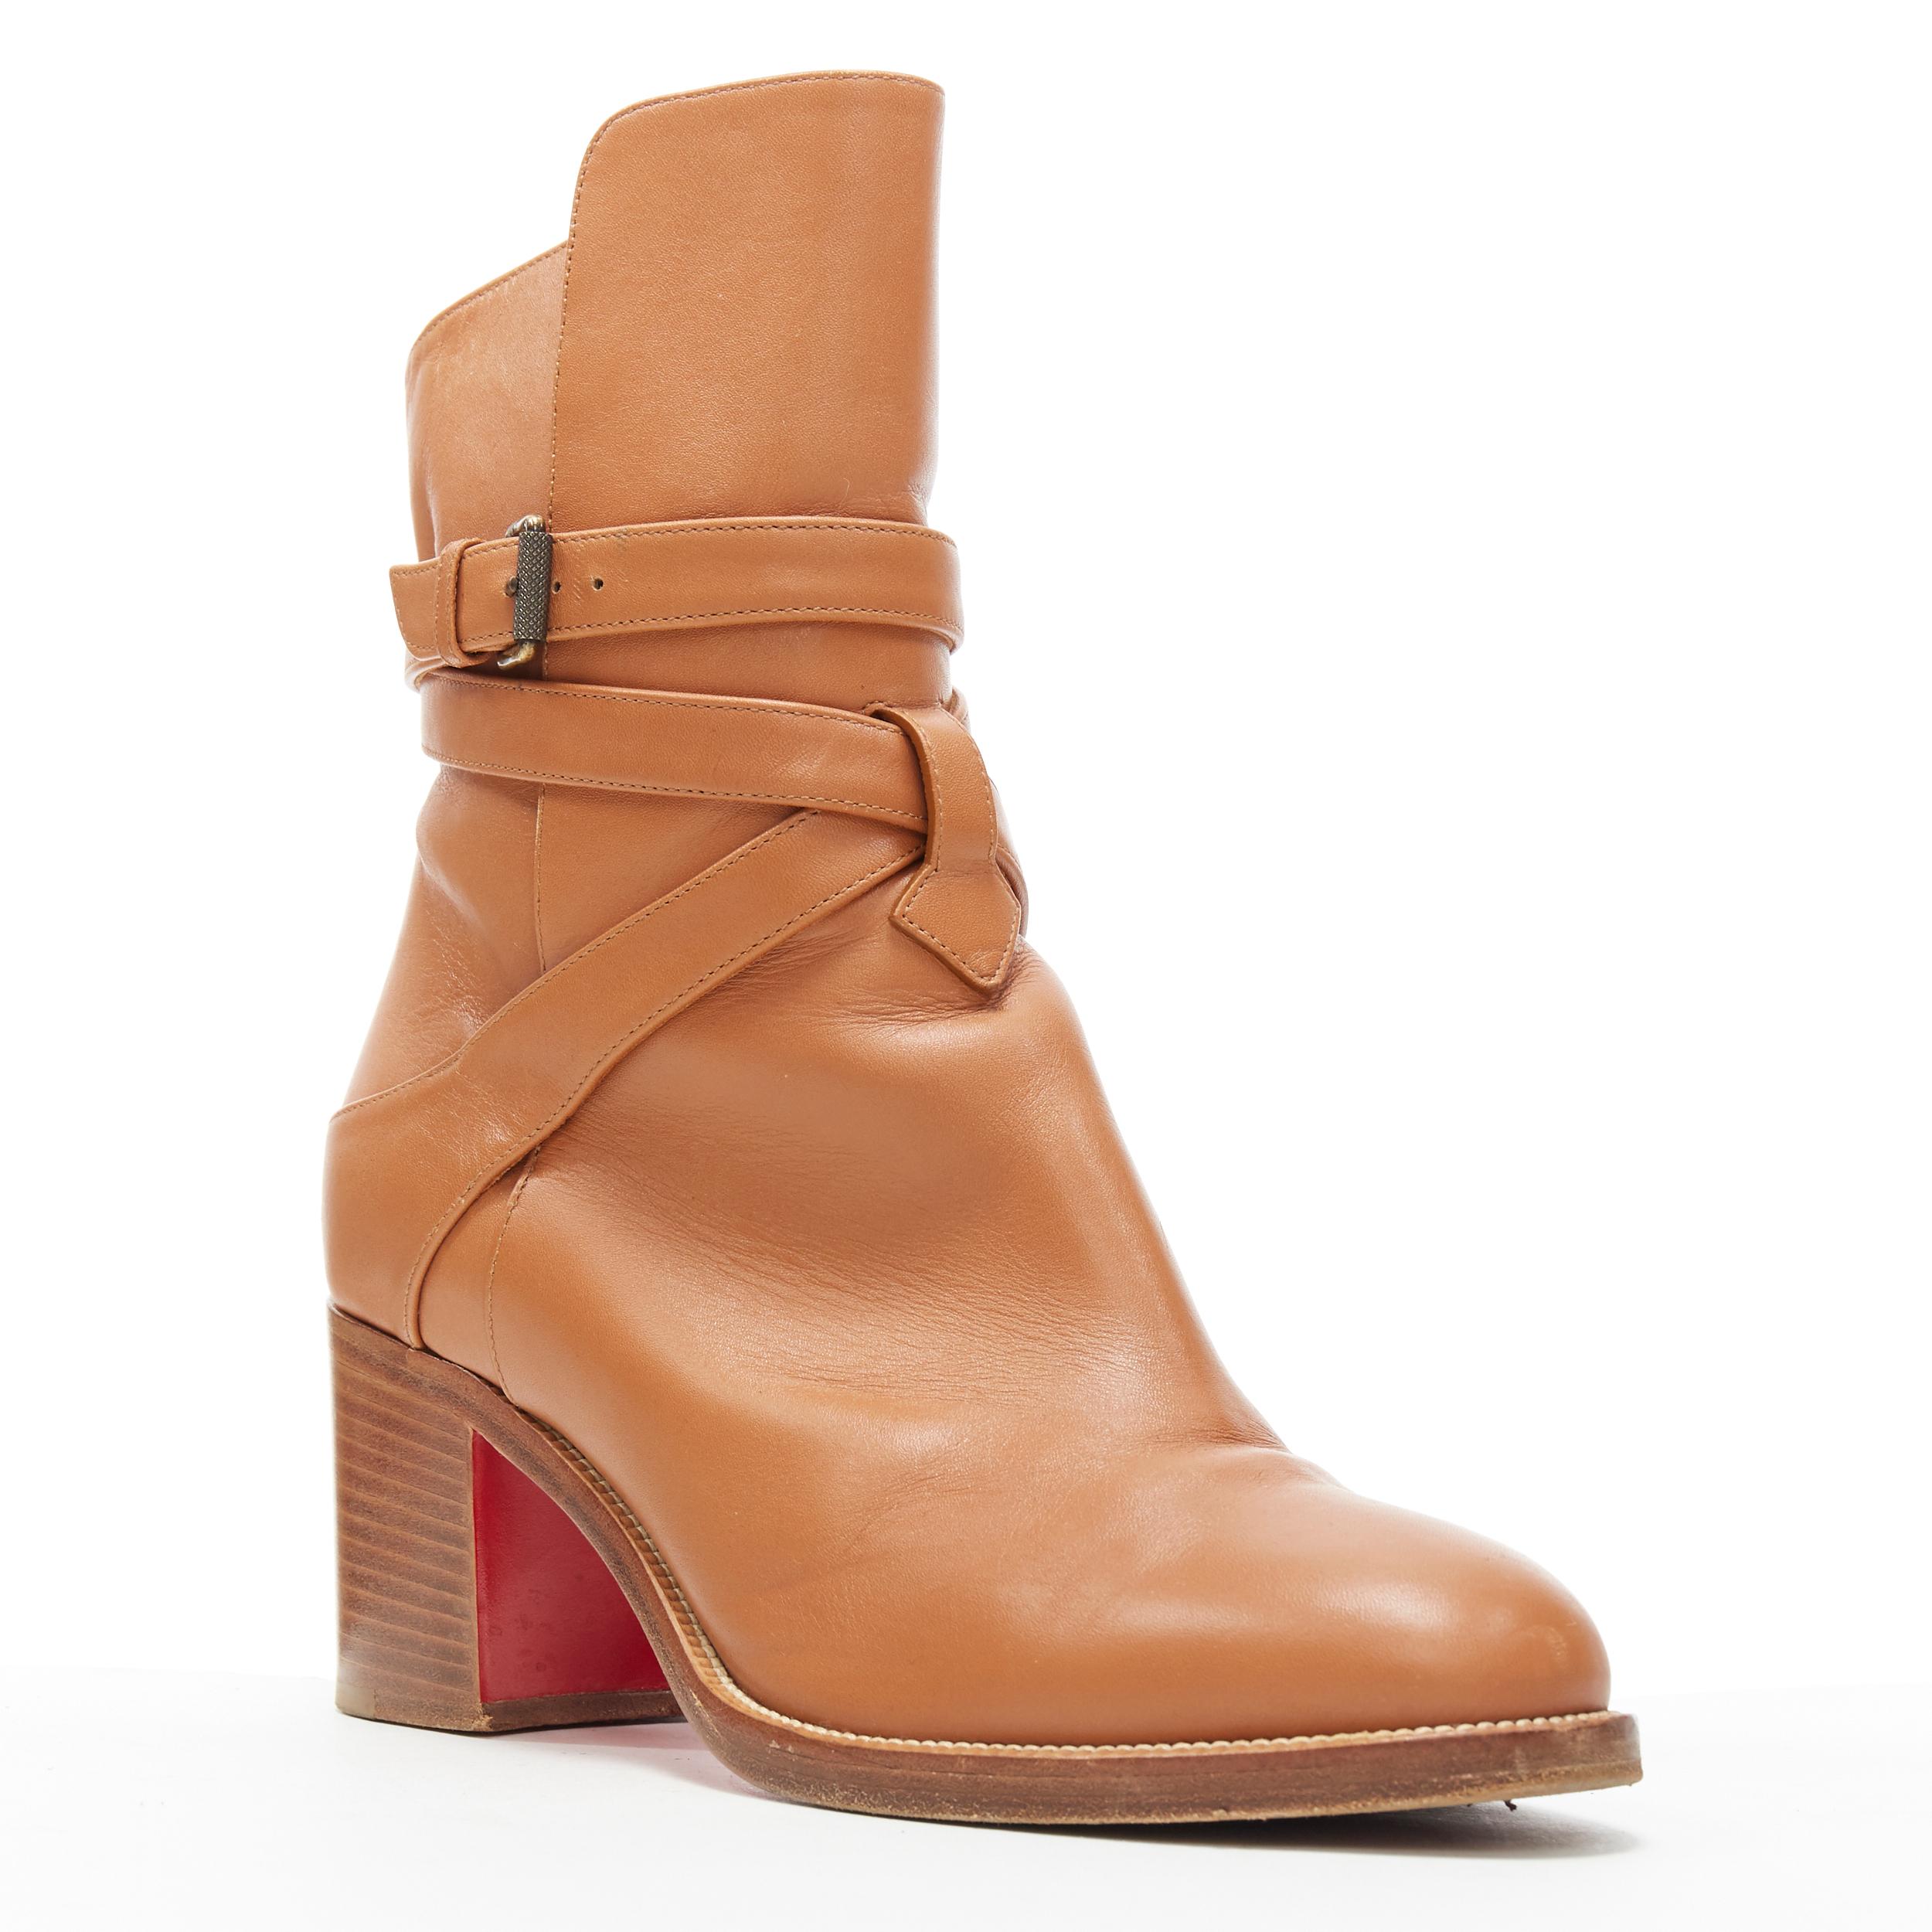 CHRISTIAN LOUBOUTIN Karistrap 70 tan brown leather wooden block heel boot EU38
Brand: Christian Louboutin
Designer: Christian Louboutin
Model Name / Style: Karistrap
Material: Leather
Color: Brown
Pattern: Solid
Closure: Ankle strap
Extra Detail: